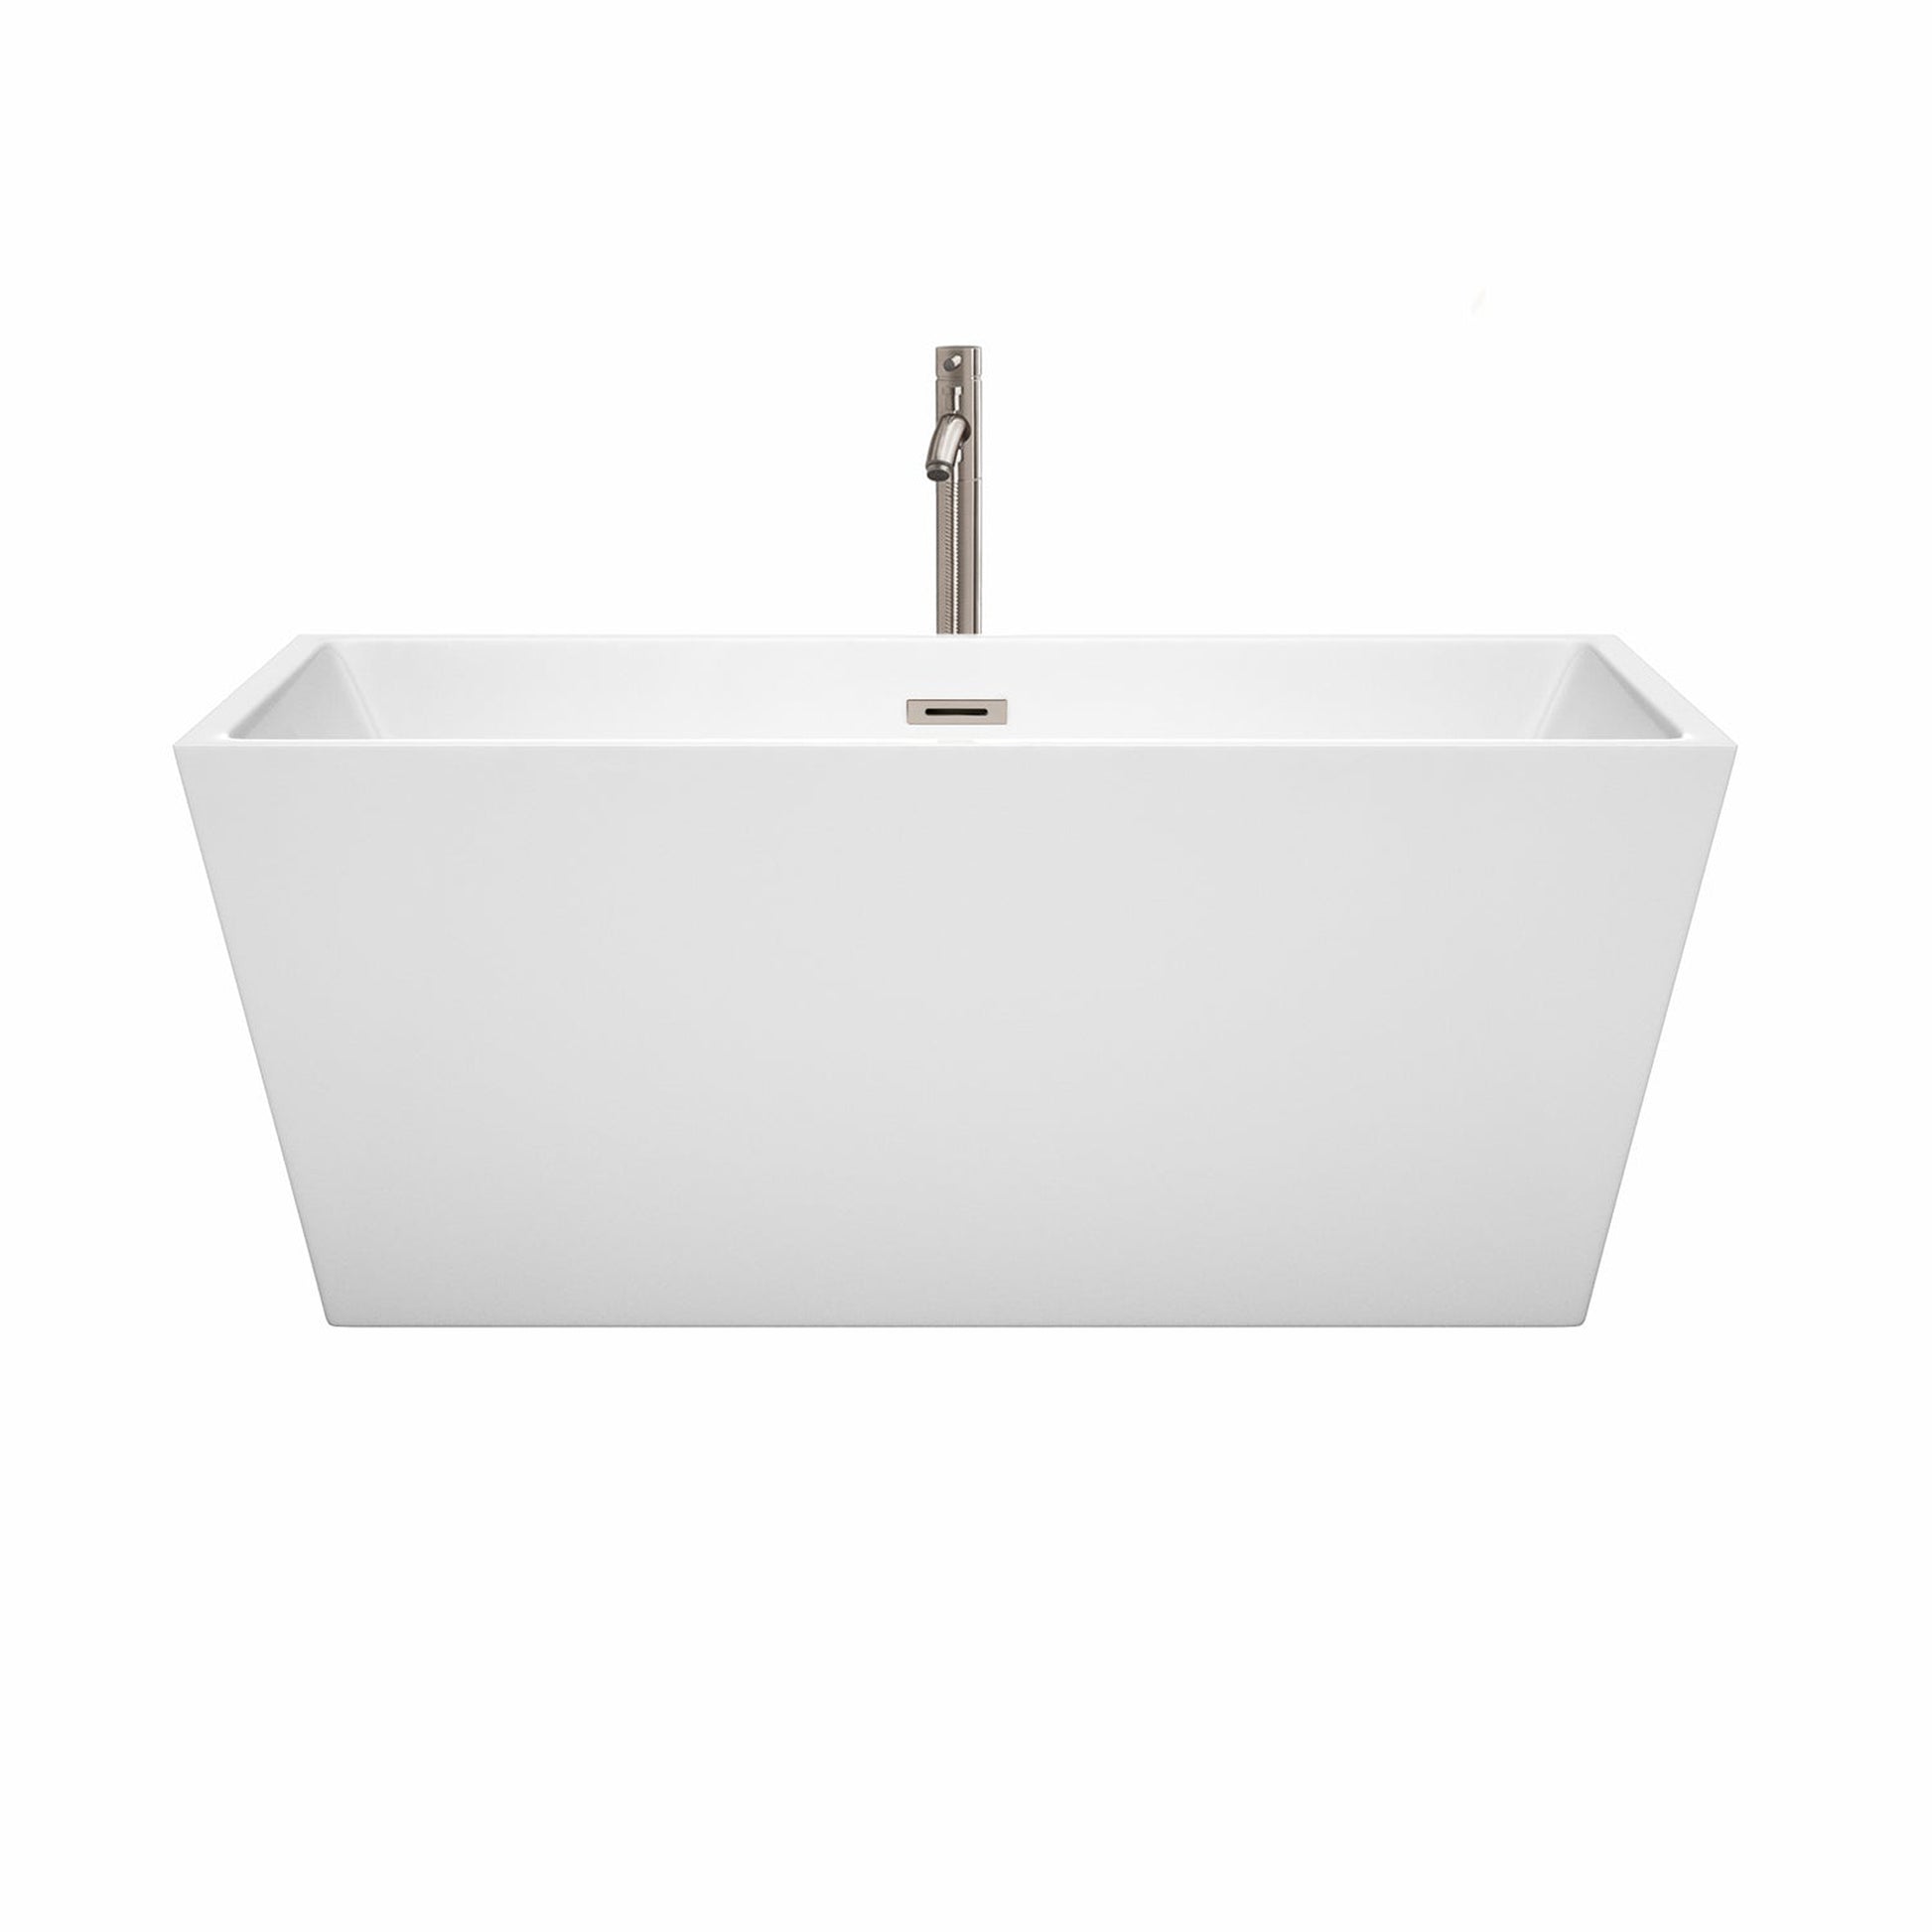 Wyndham Collection Sara 59" Freestanding Bathtub in White With Floor Mounted Faucet, Drain and Overflow Trim in Brushed Nickel